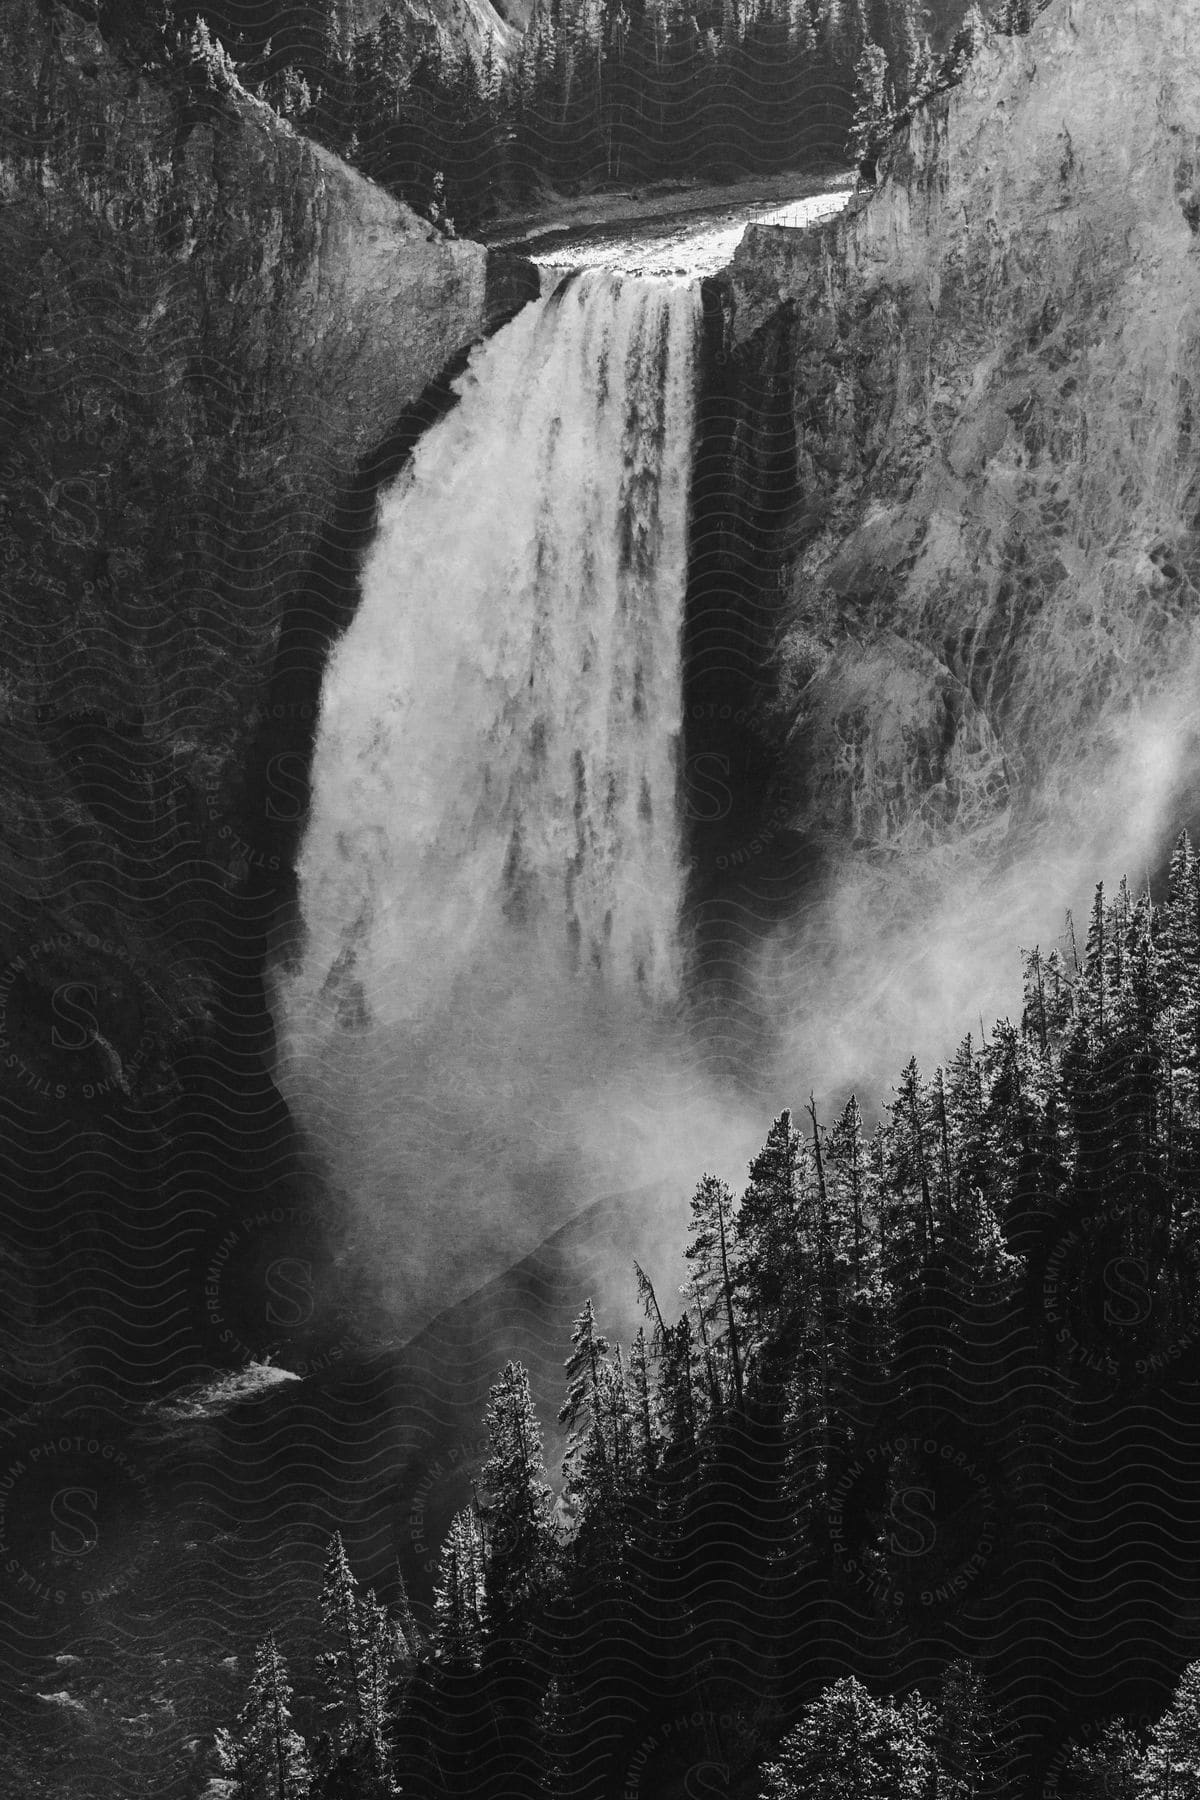 Stock photo of a blackandwhite image of a waterfall surrounded by trees and vegetation in a natural landscape